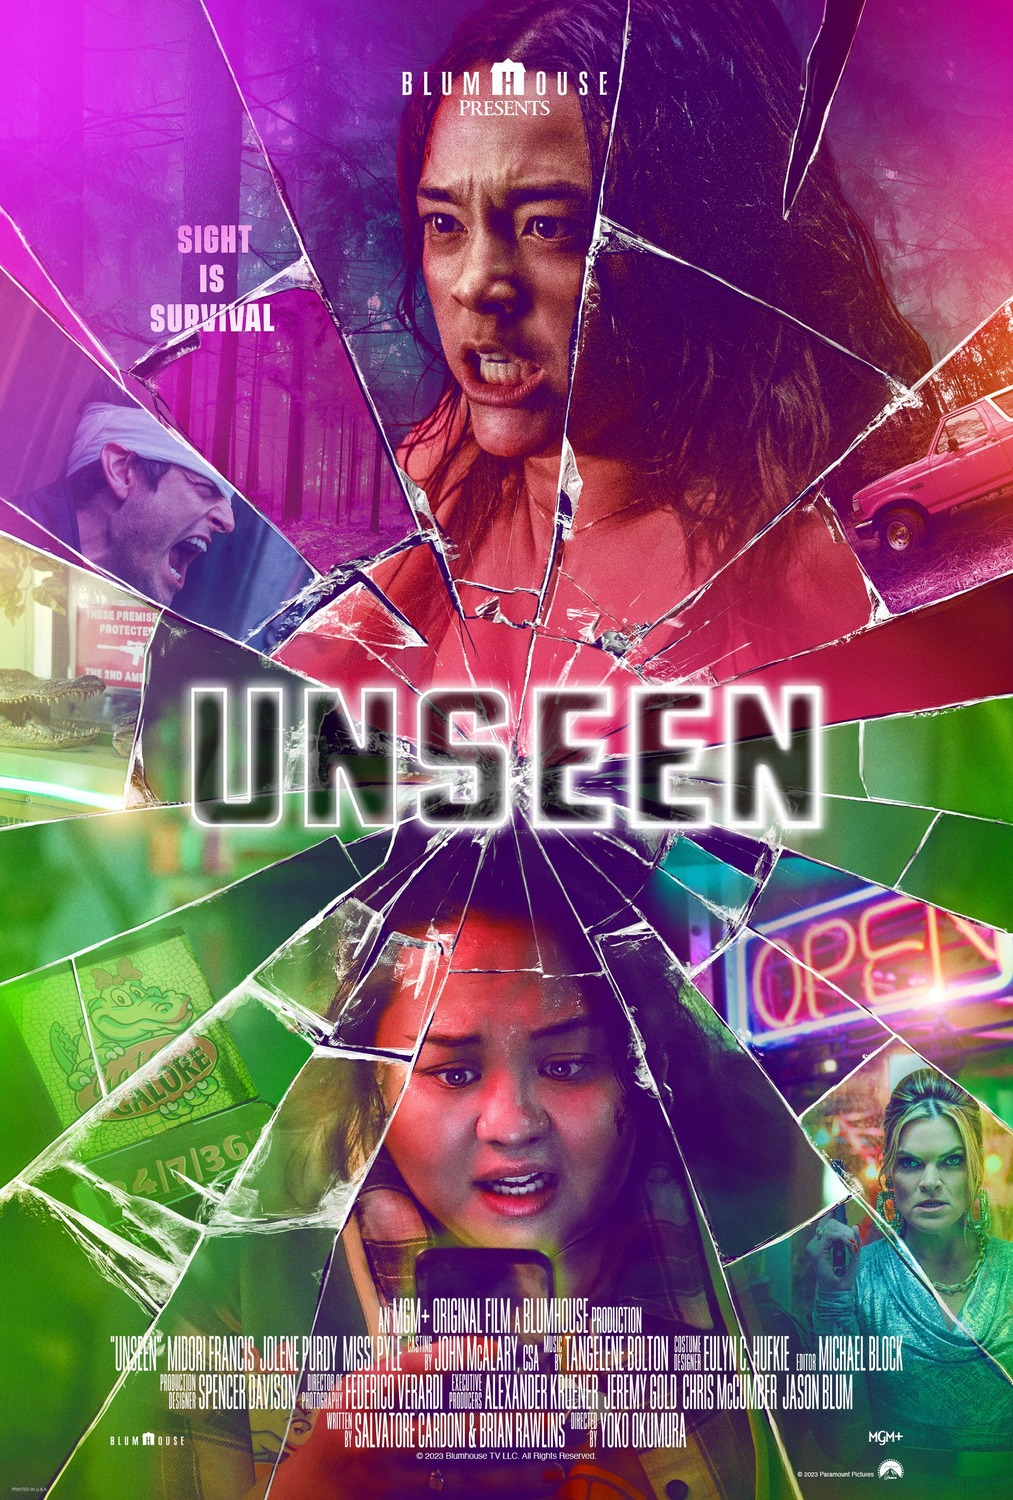 Extra Large Movie Poster Image for Unseen 